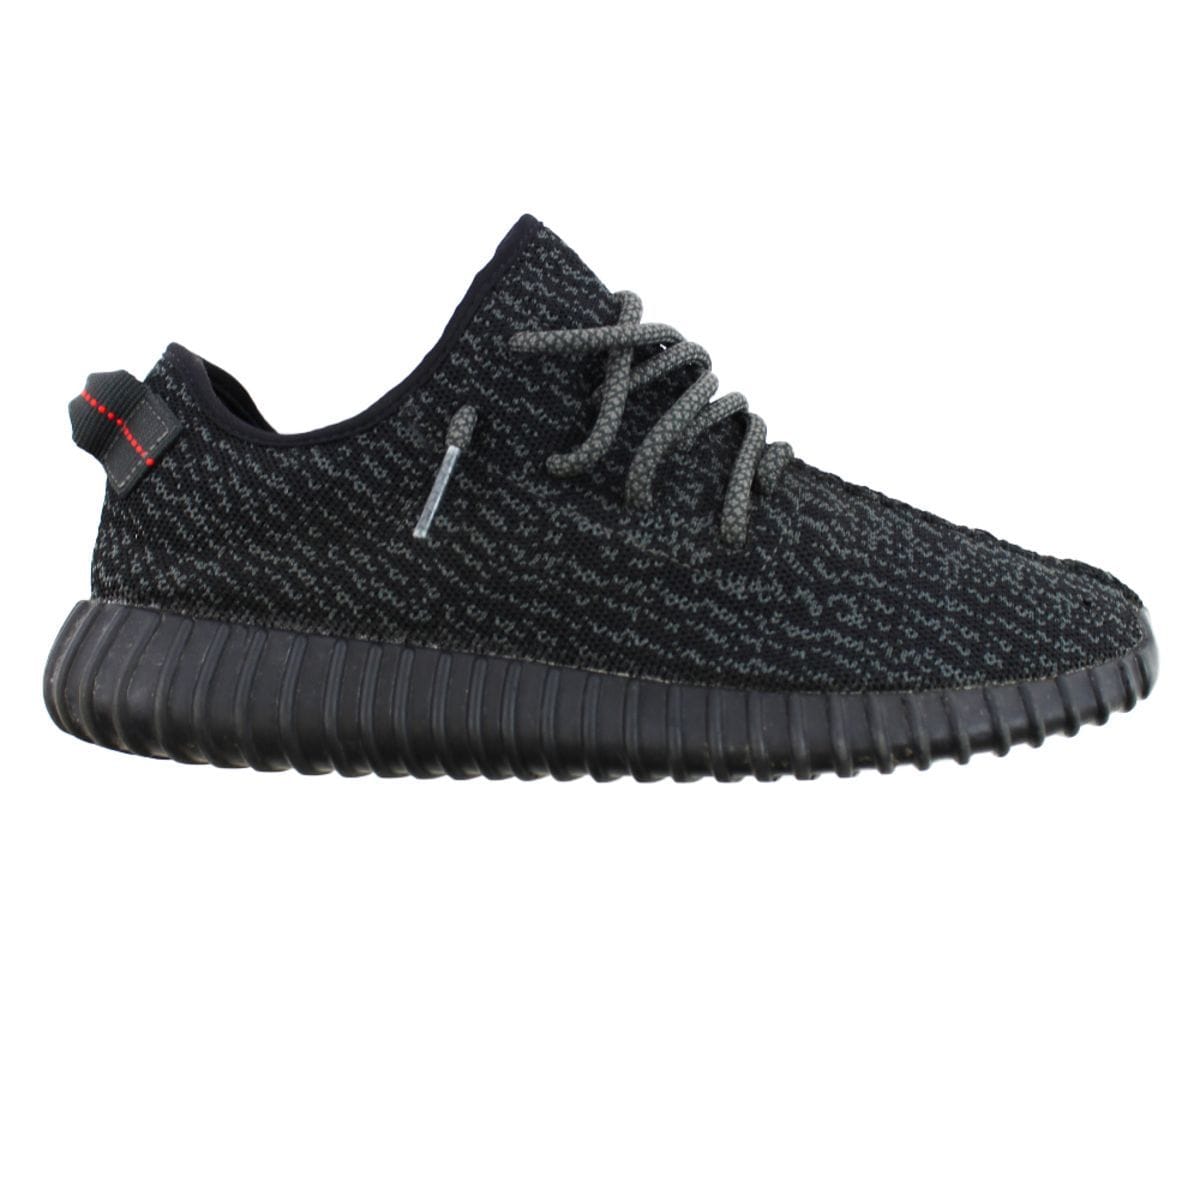 Adidas x Yeezy 350 Boost Pirate Black - SaruGeneral